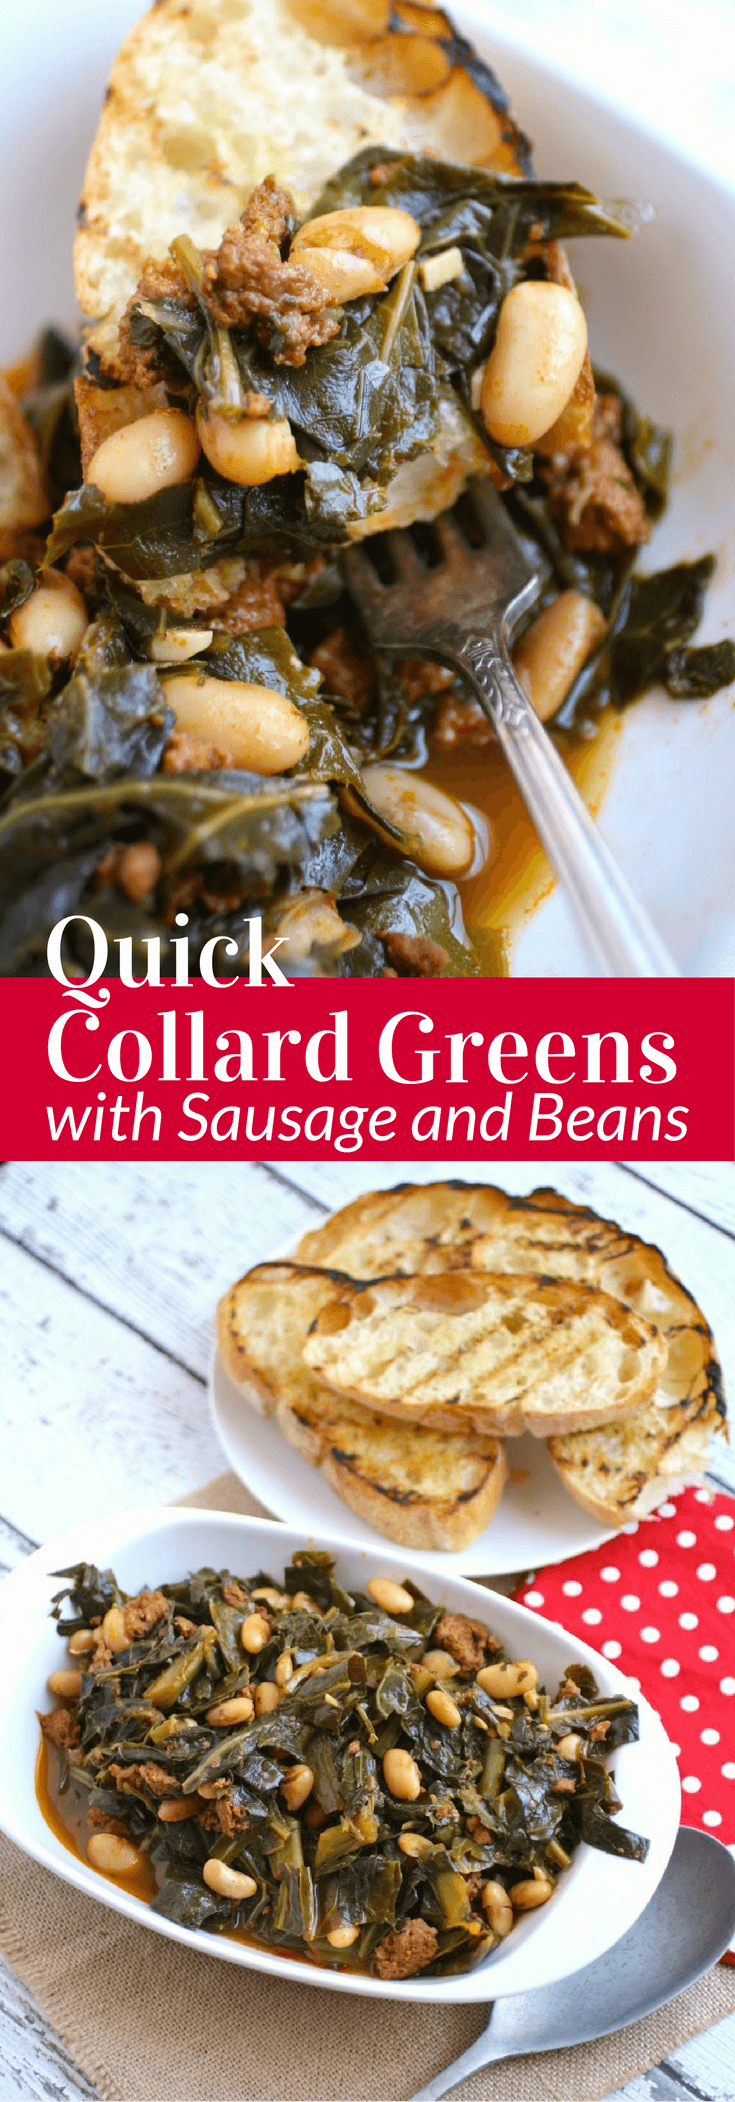 Enjoy Quick Collard Greens with Sausage and Beans as a traditional side dish on New Year's Day!